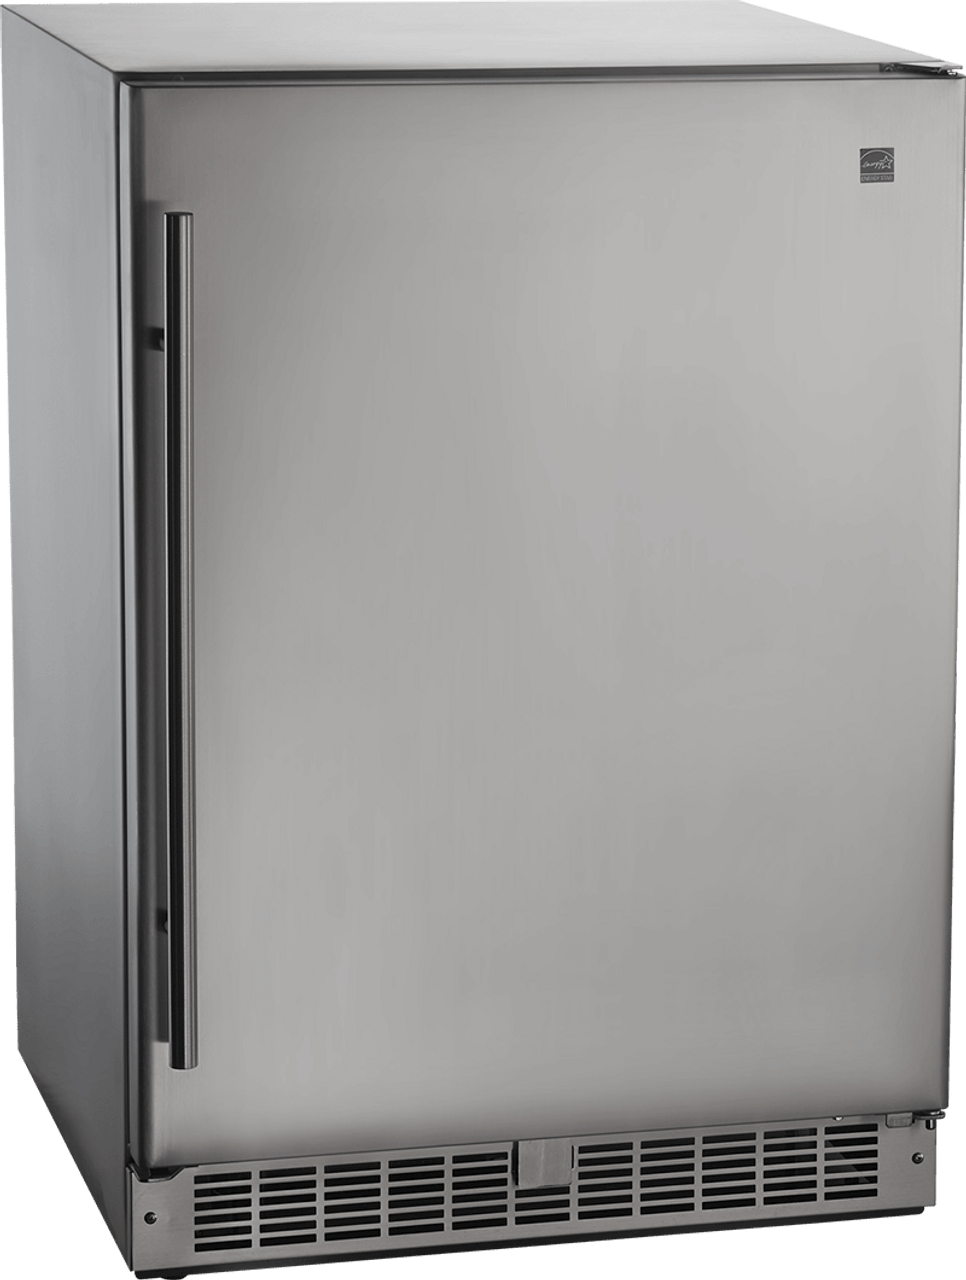 Napoleon NFR055OUSS Oasis Outdoor Rated Stainless Steel Fridge